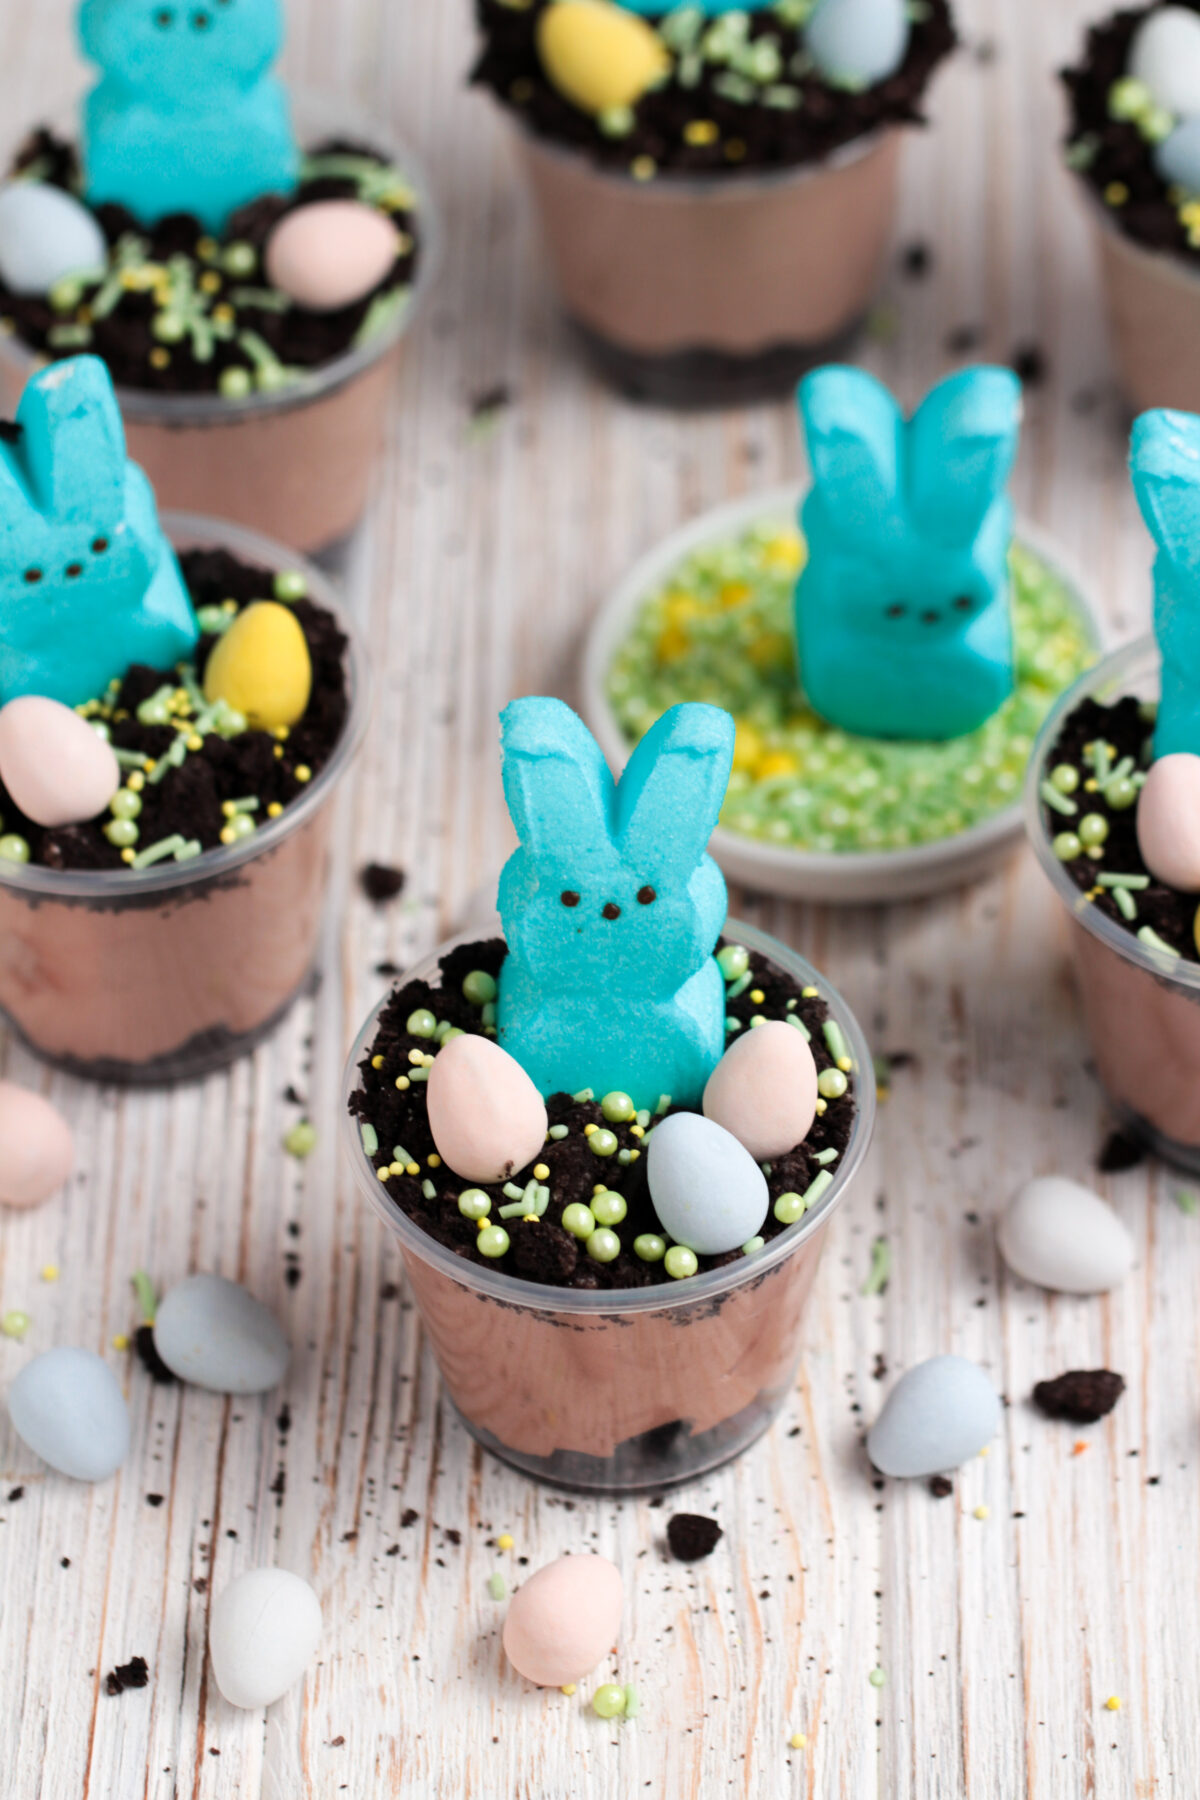 Indulge in the joy of Easter with this delightful Easter Dirt Cups recipe, these cups blend chocolatey goodness with a playful presentation.